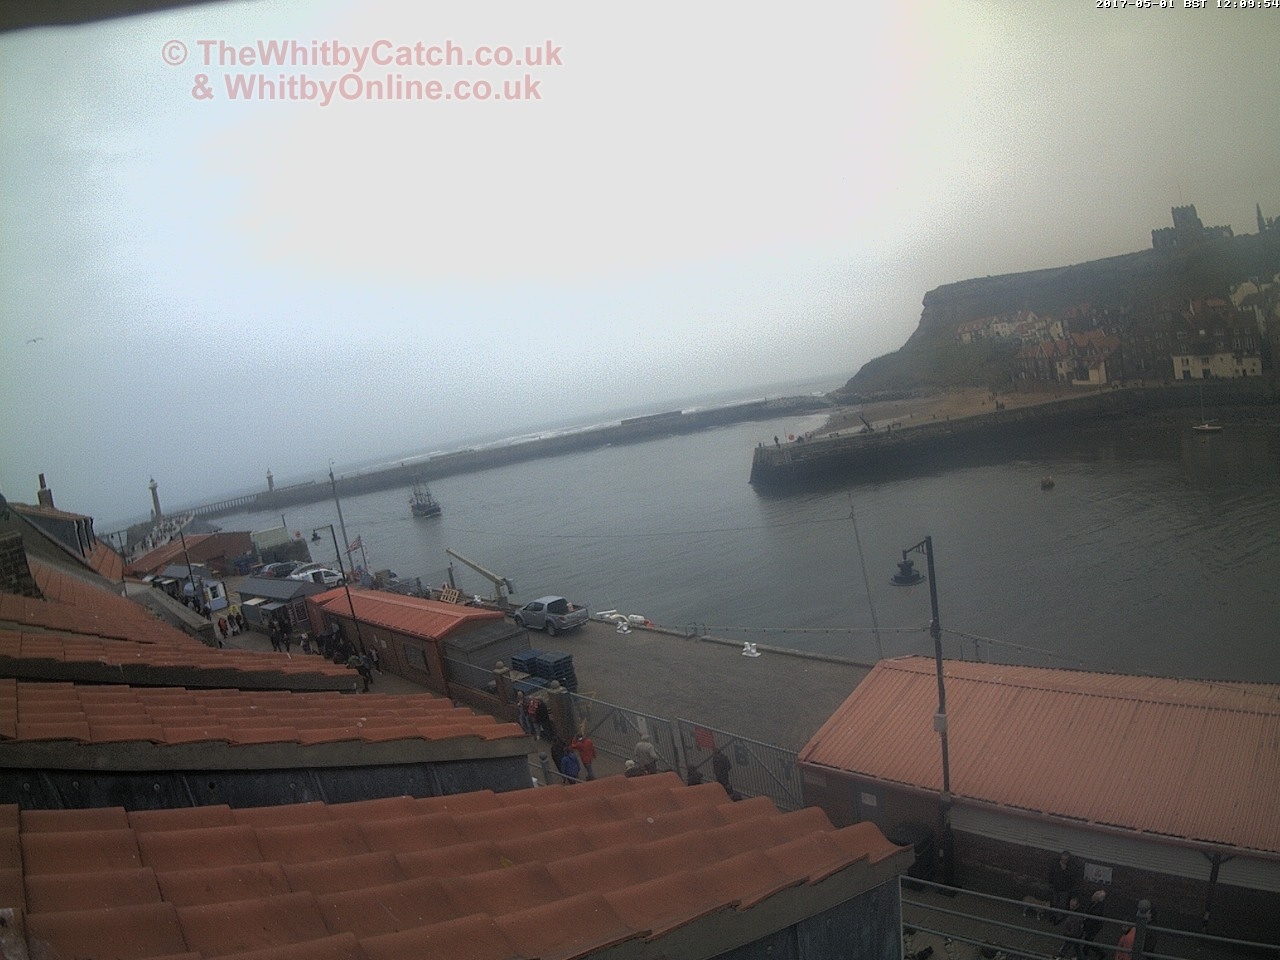 Whitby Mon 1st May 2017 12:10.